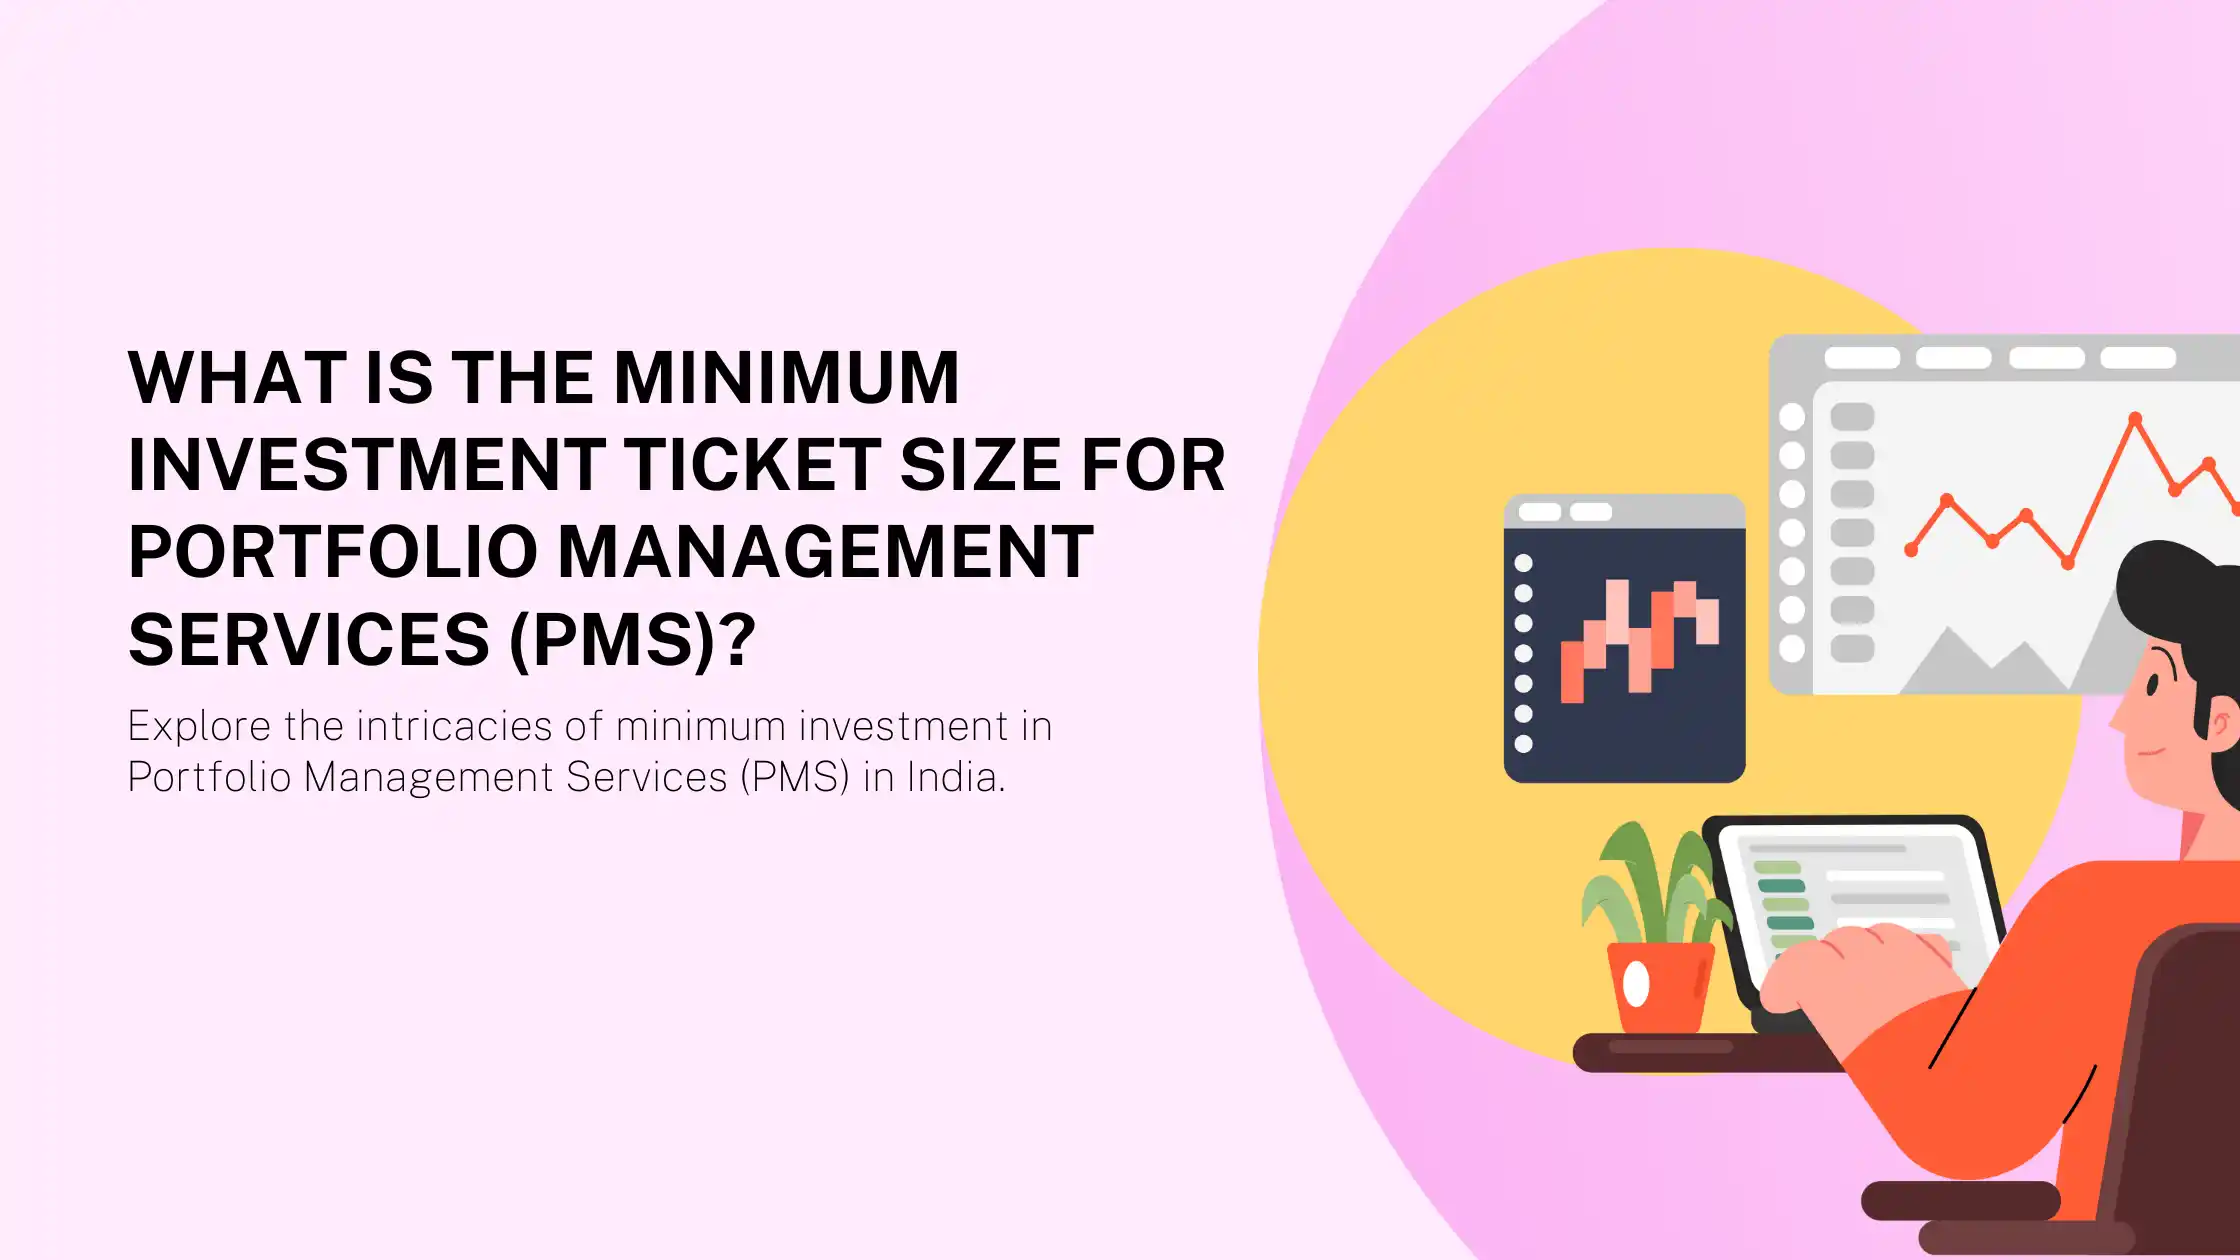 What is the Minimum Investment Ticket Size for Portfolio Management Services (PMS)?